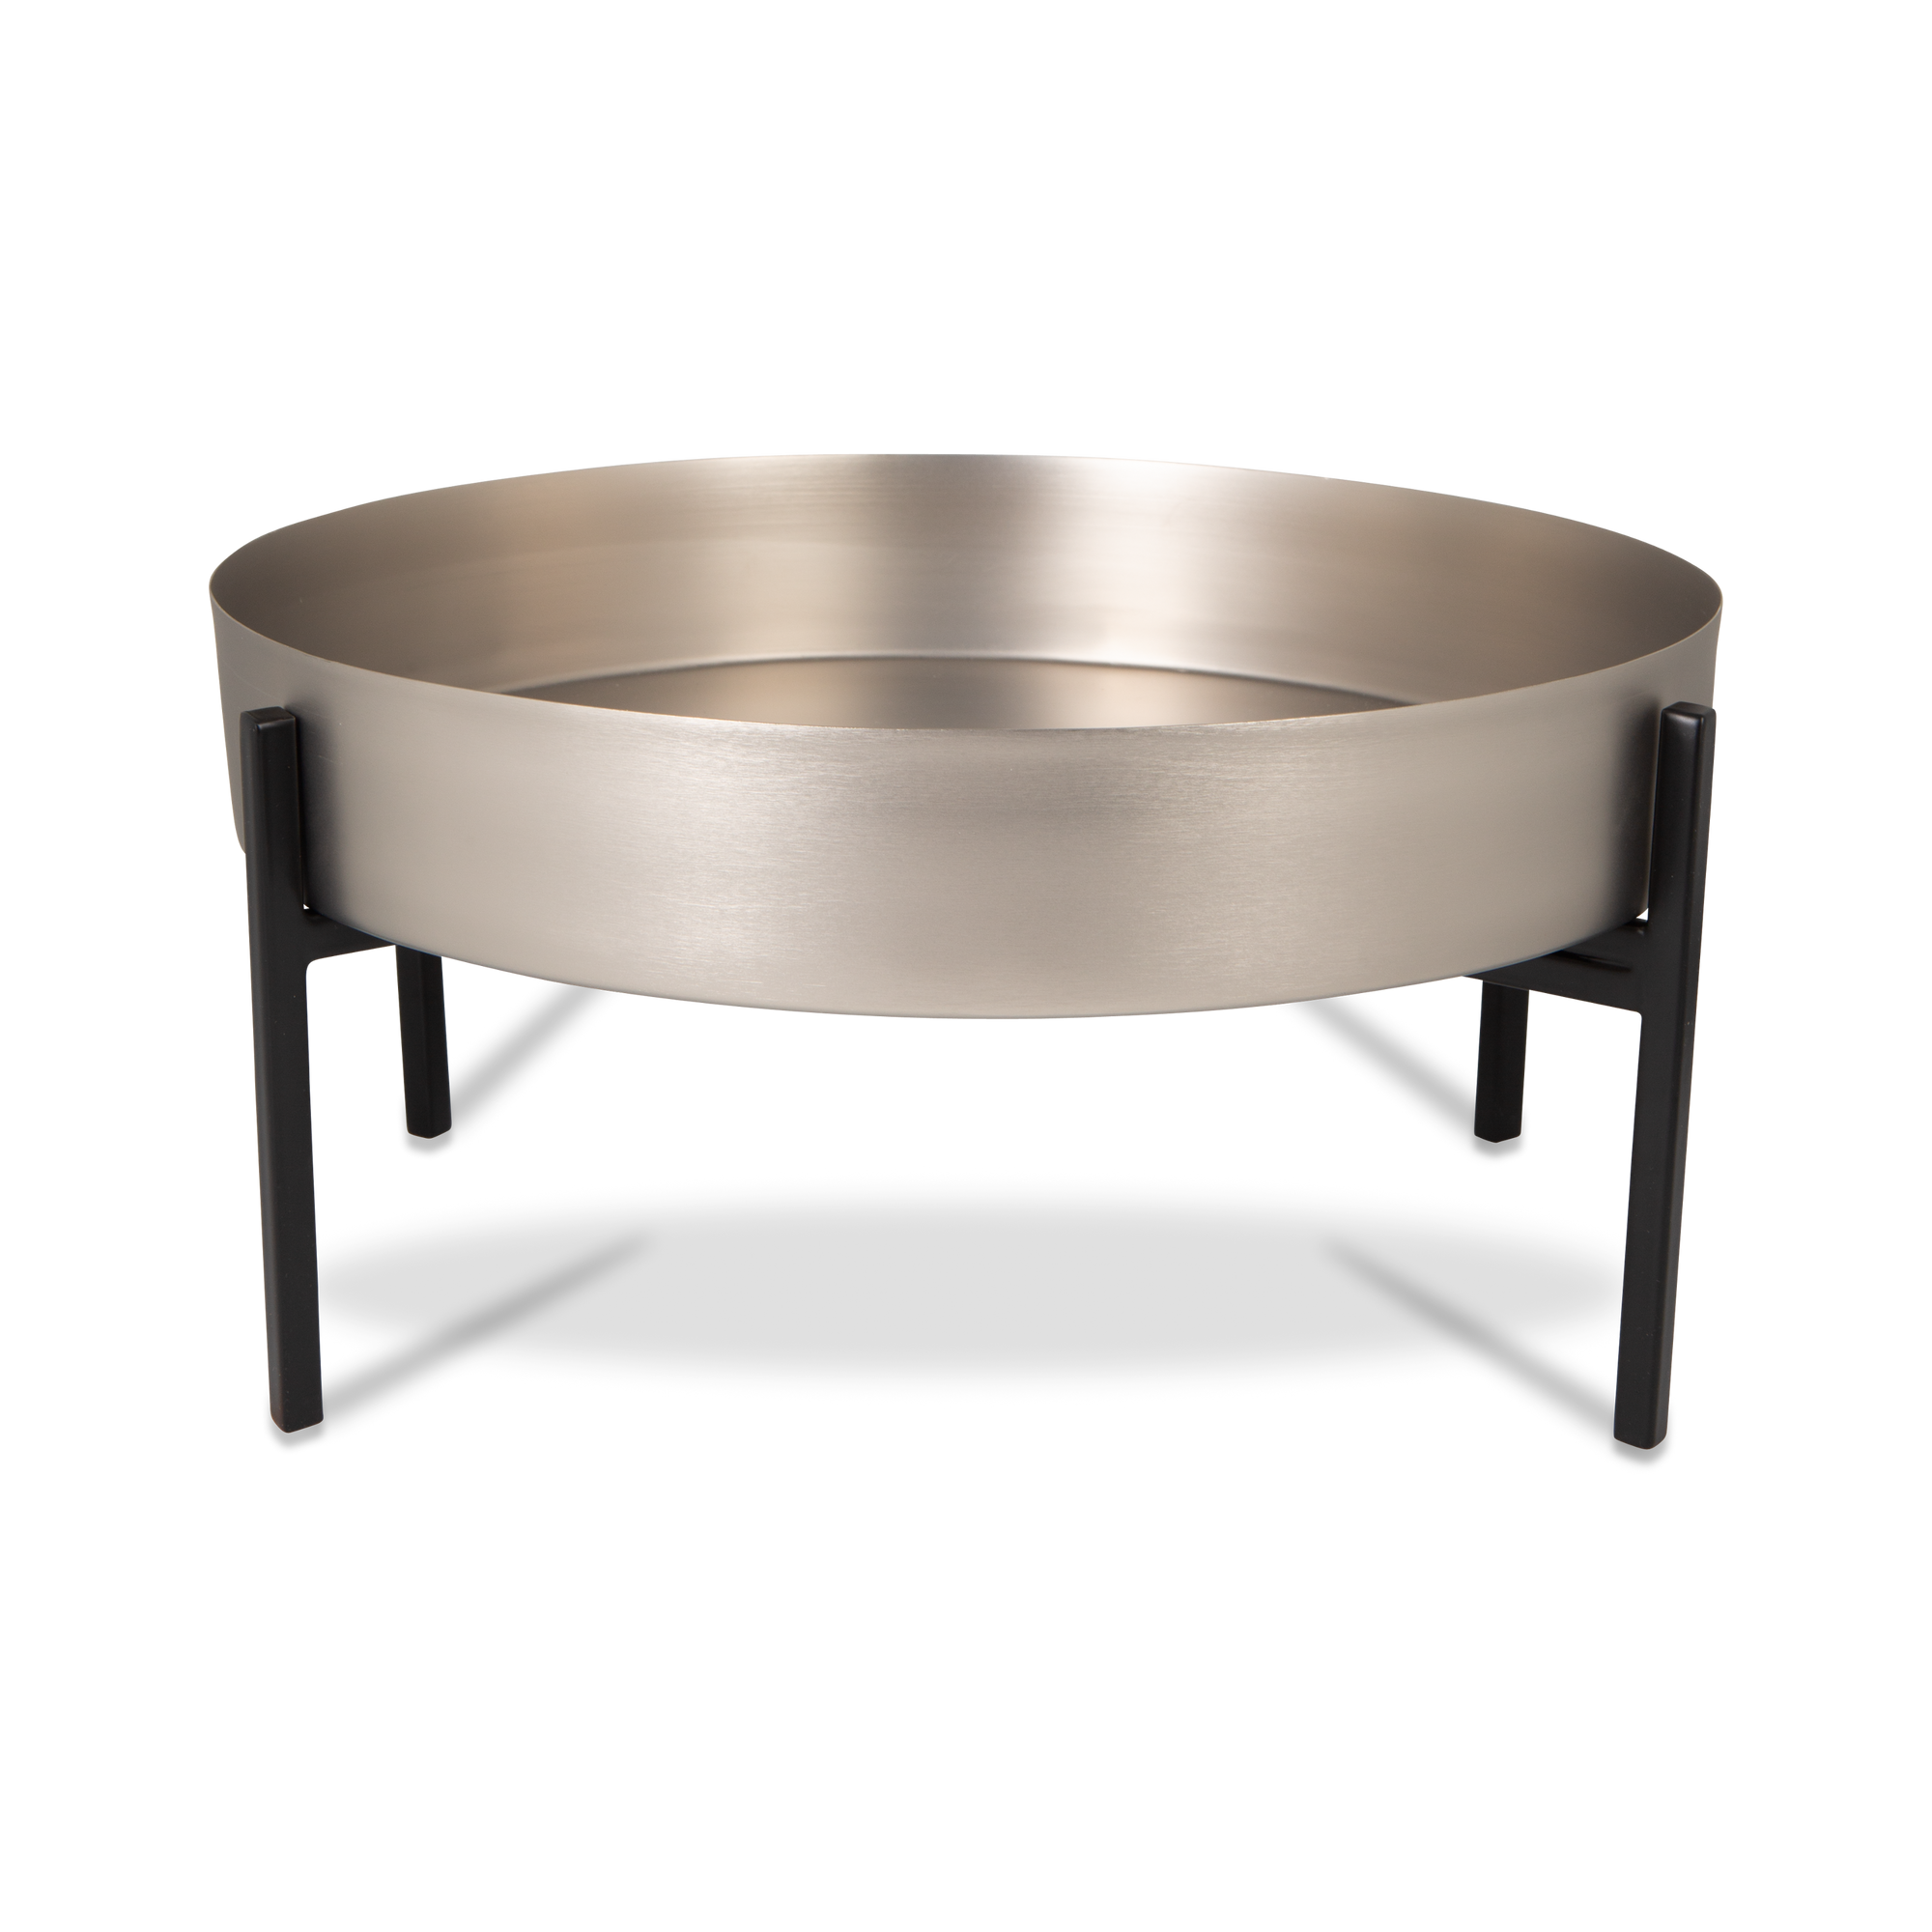 Defined by its sleek silhouette, the Sera Platter On Stand brings timeless style to indoor/outdoor entertaining.